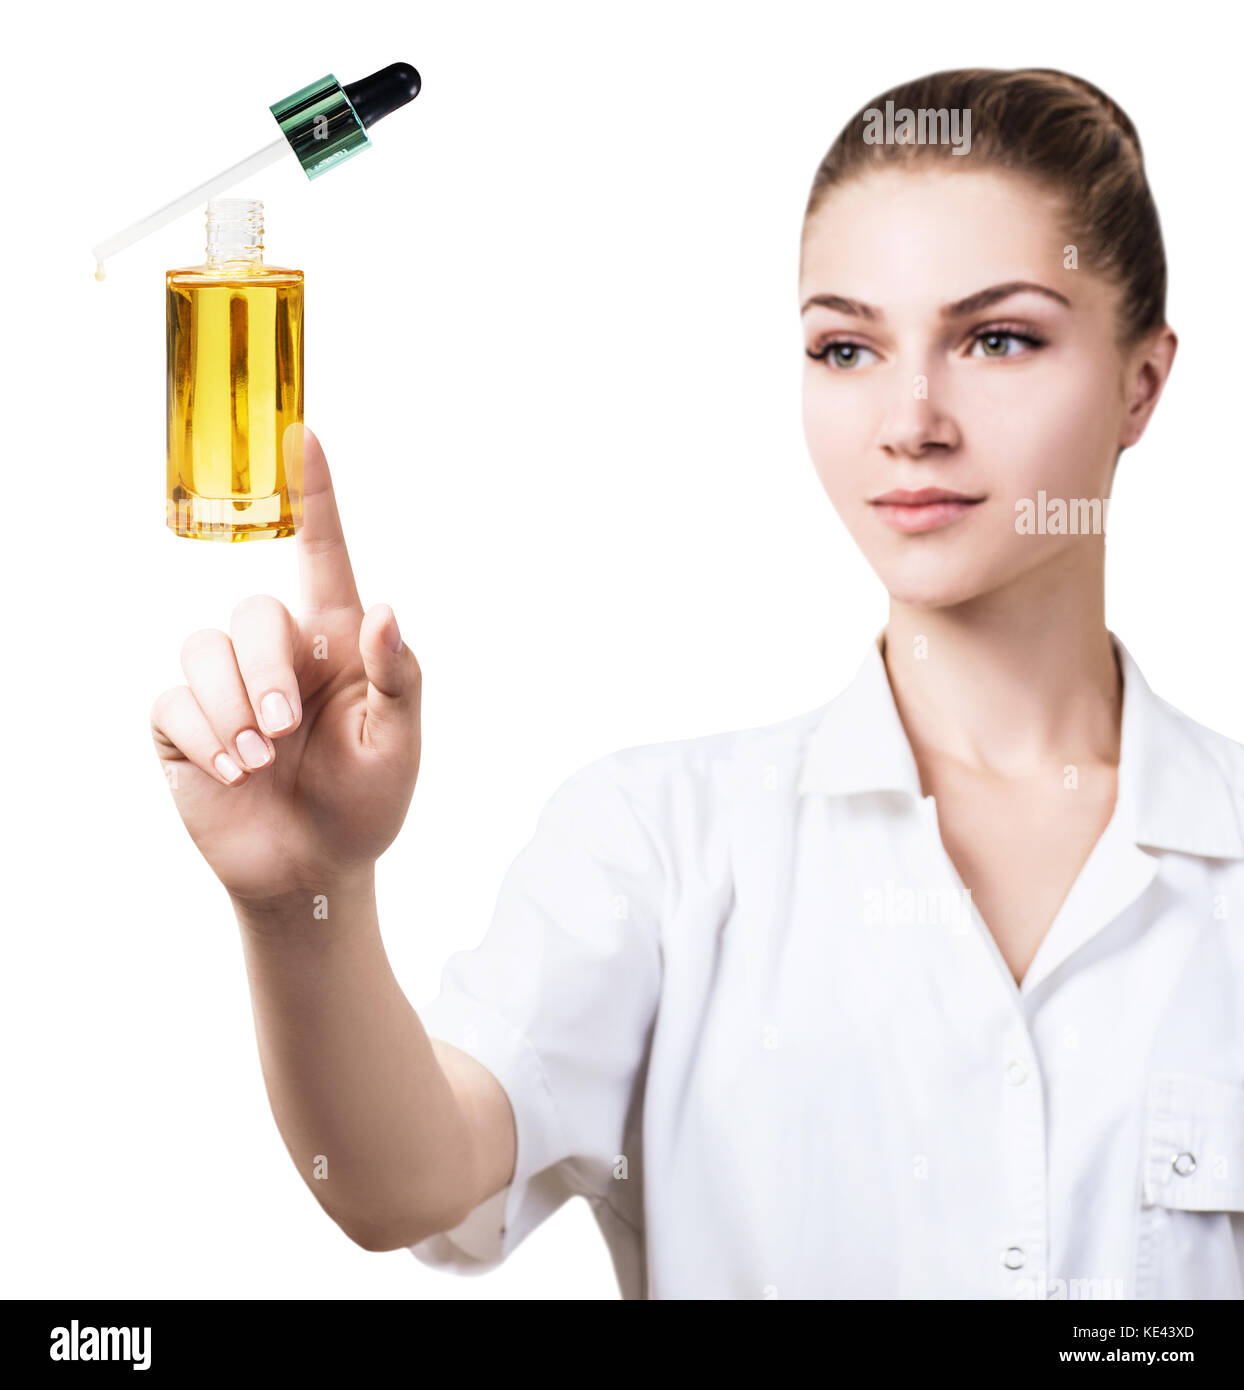 Young cosmetologist woman presents cosmetics oil. Stock Photo